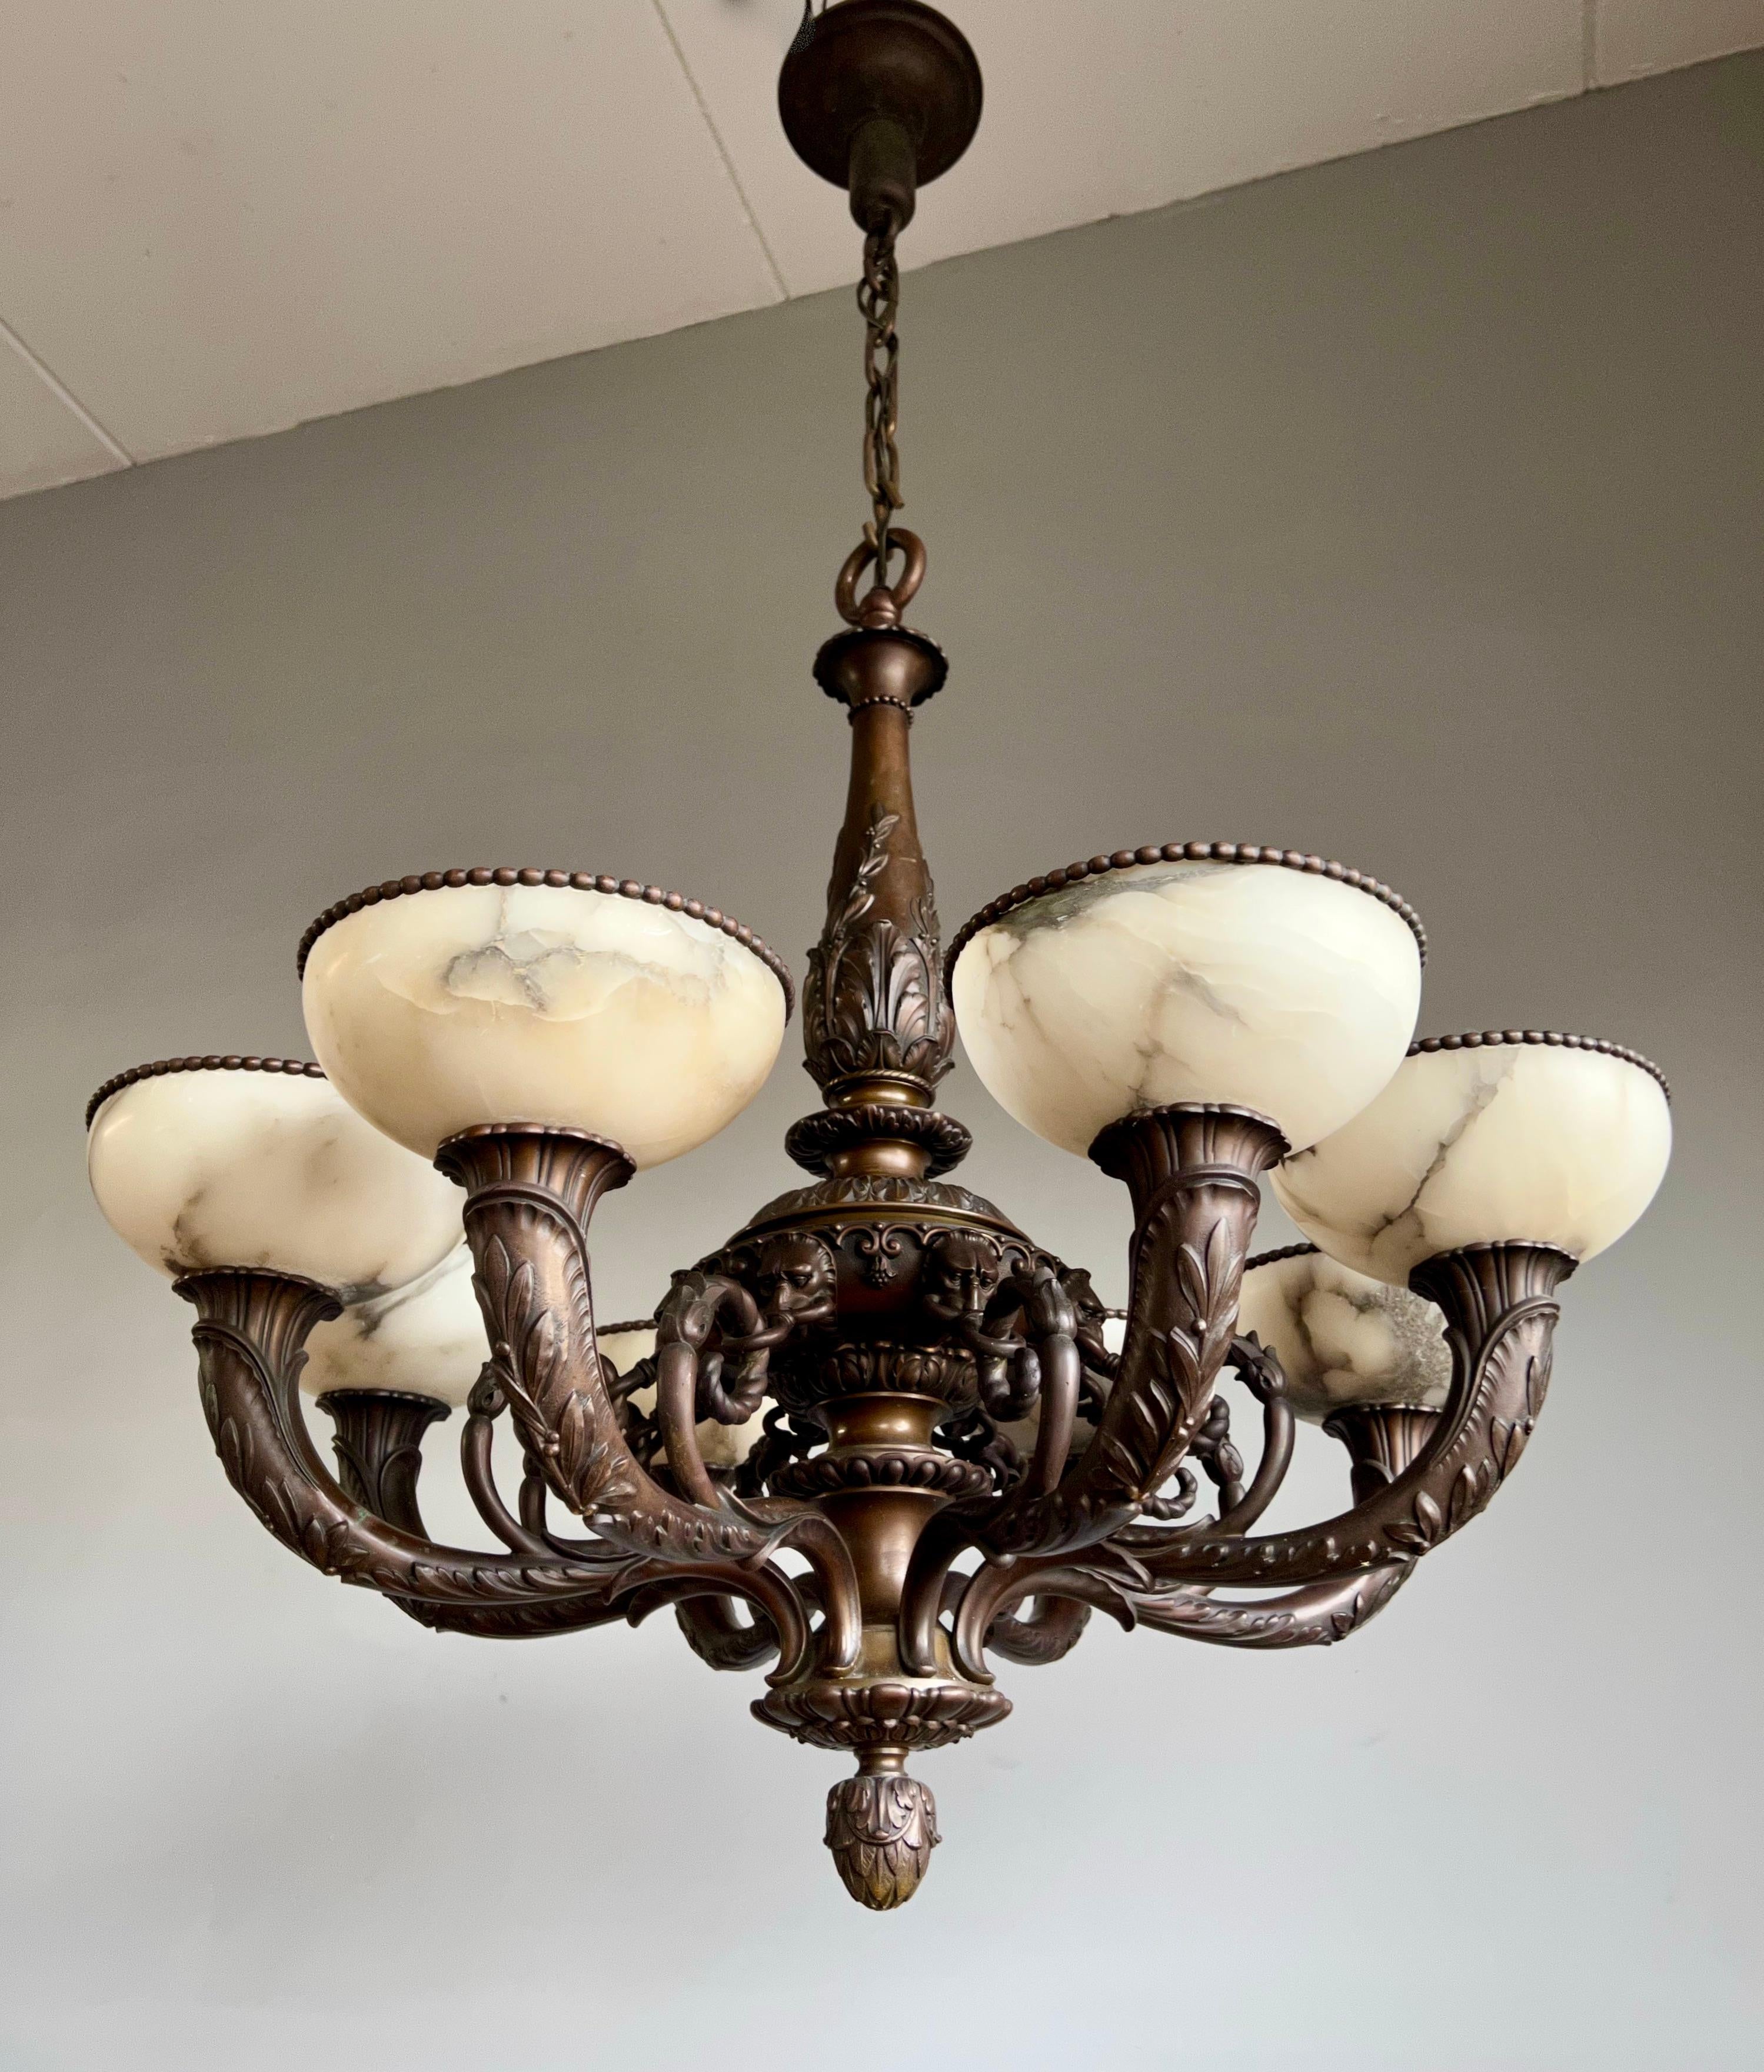 Striking and exclusive 1920s bronze and alabaster light fixture for the perfect atmosphere.

If you are looking for a remarkable light fixture to grace your living space then this antique and large bronze 8 arm chandelier with stylish lion